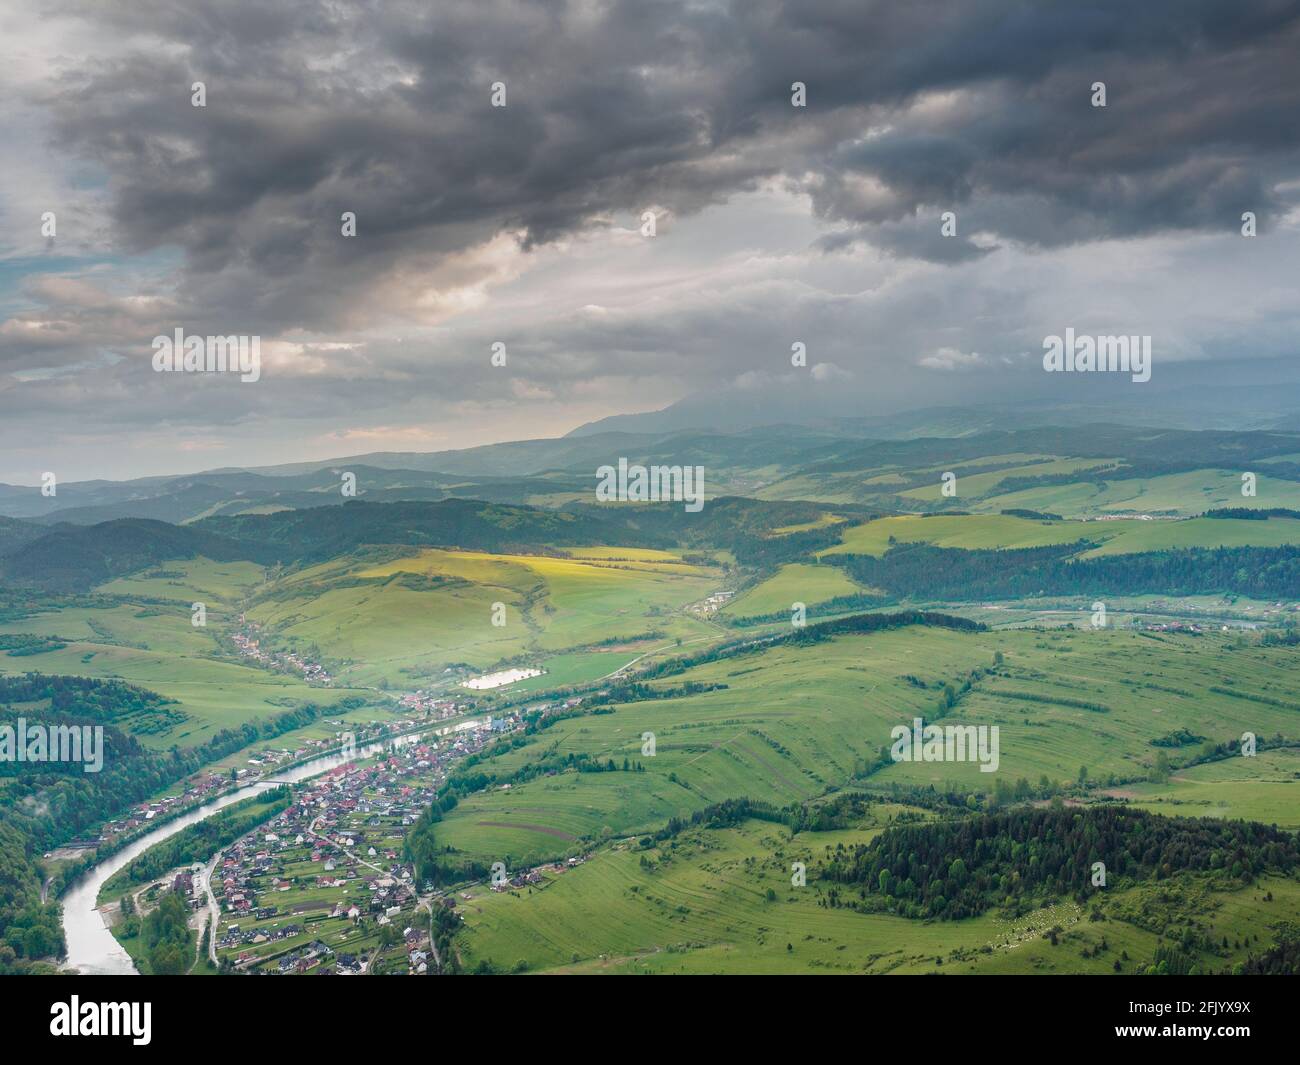 view from the Trzy Korony Summit to Sromowce Niżne, the Dunajec River.  In the distance there is an approaching storm from the Tatra Mountains Stock Photo